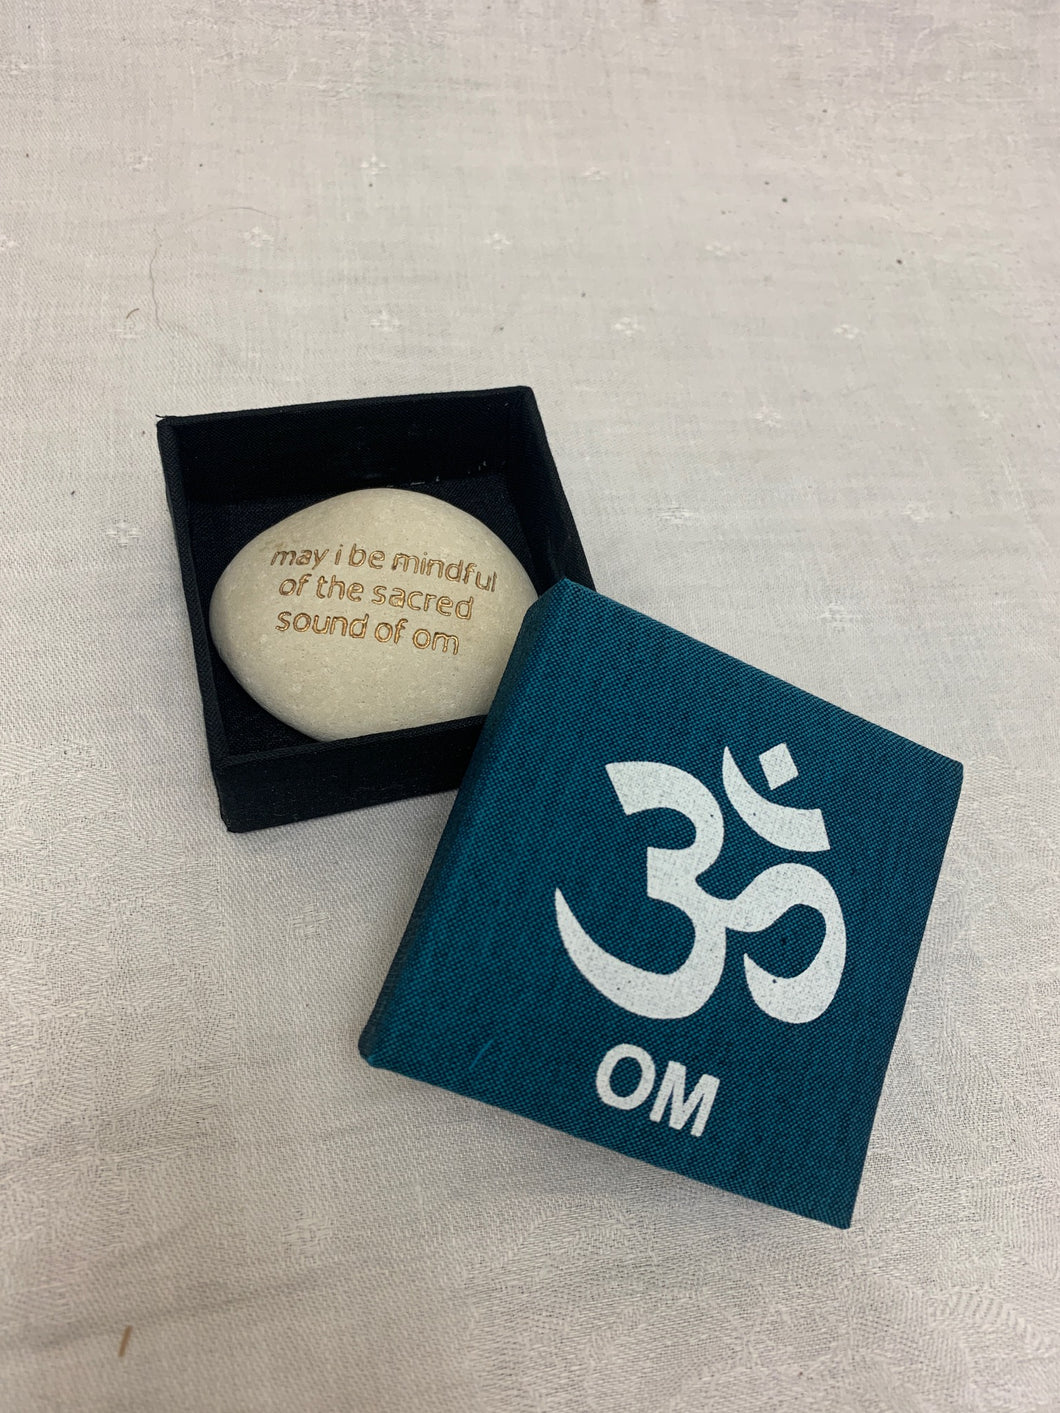 box - affirmation OM - turquoise - stone  'may I be mindful of the sacred sound of Om'